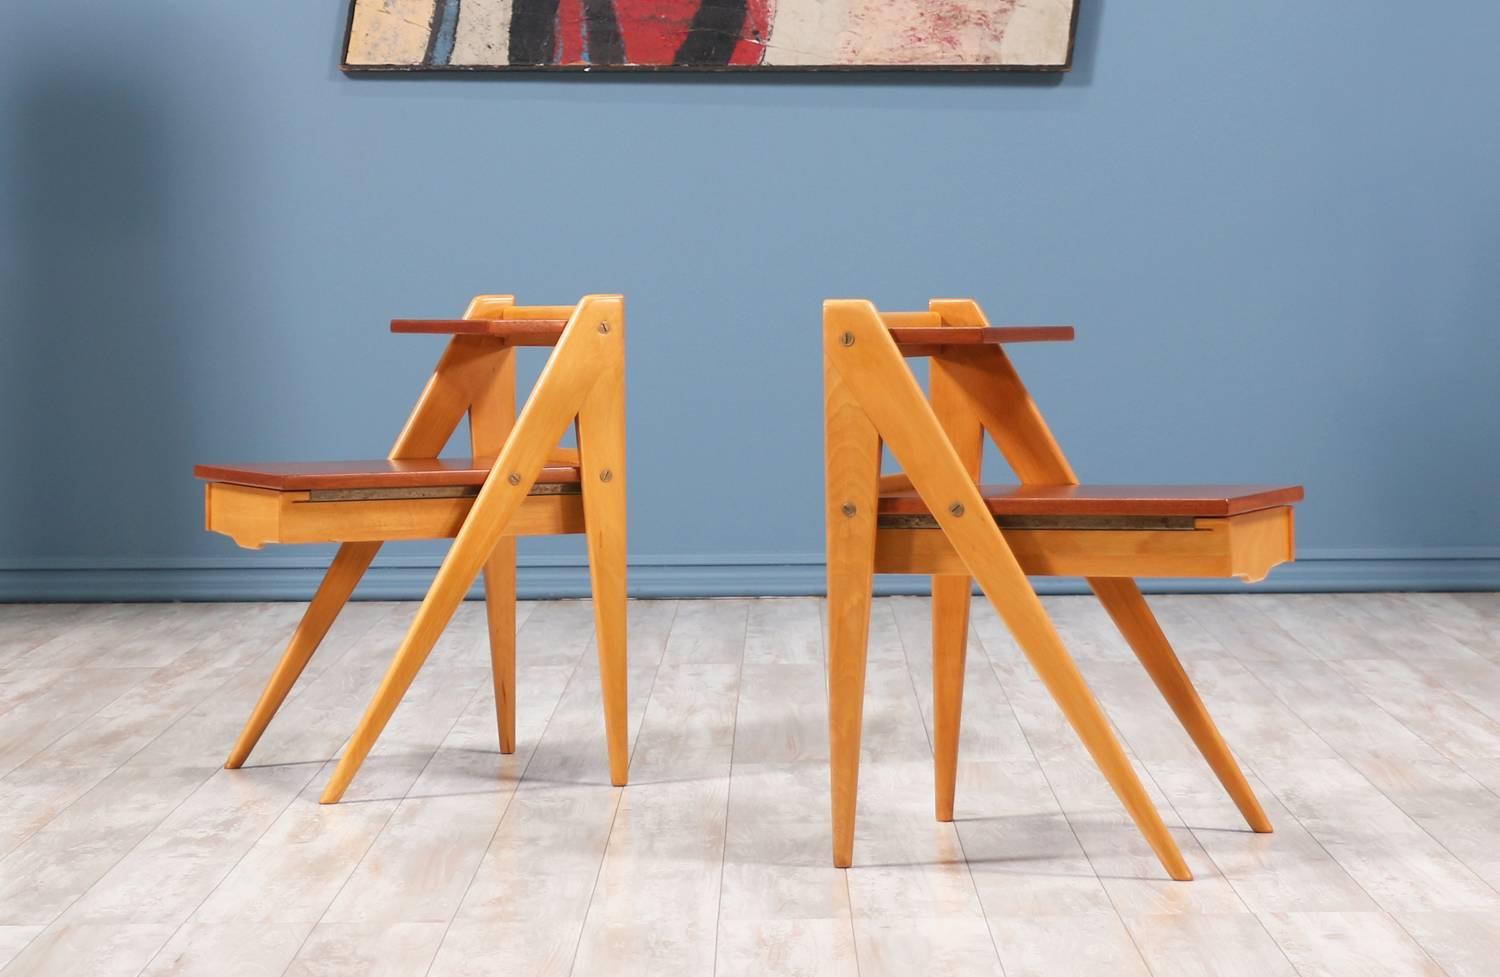 A pair of side tables designed and manufactured by Yngve Ekström in Sweden circa 1950’s. This exceptional pair of side tables features a beechwood frame with scissor-like legs and contrasting teak tops. Each table has brass hardware and a shallow